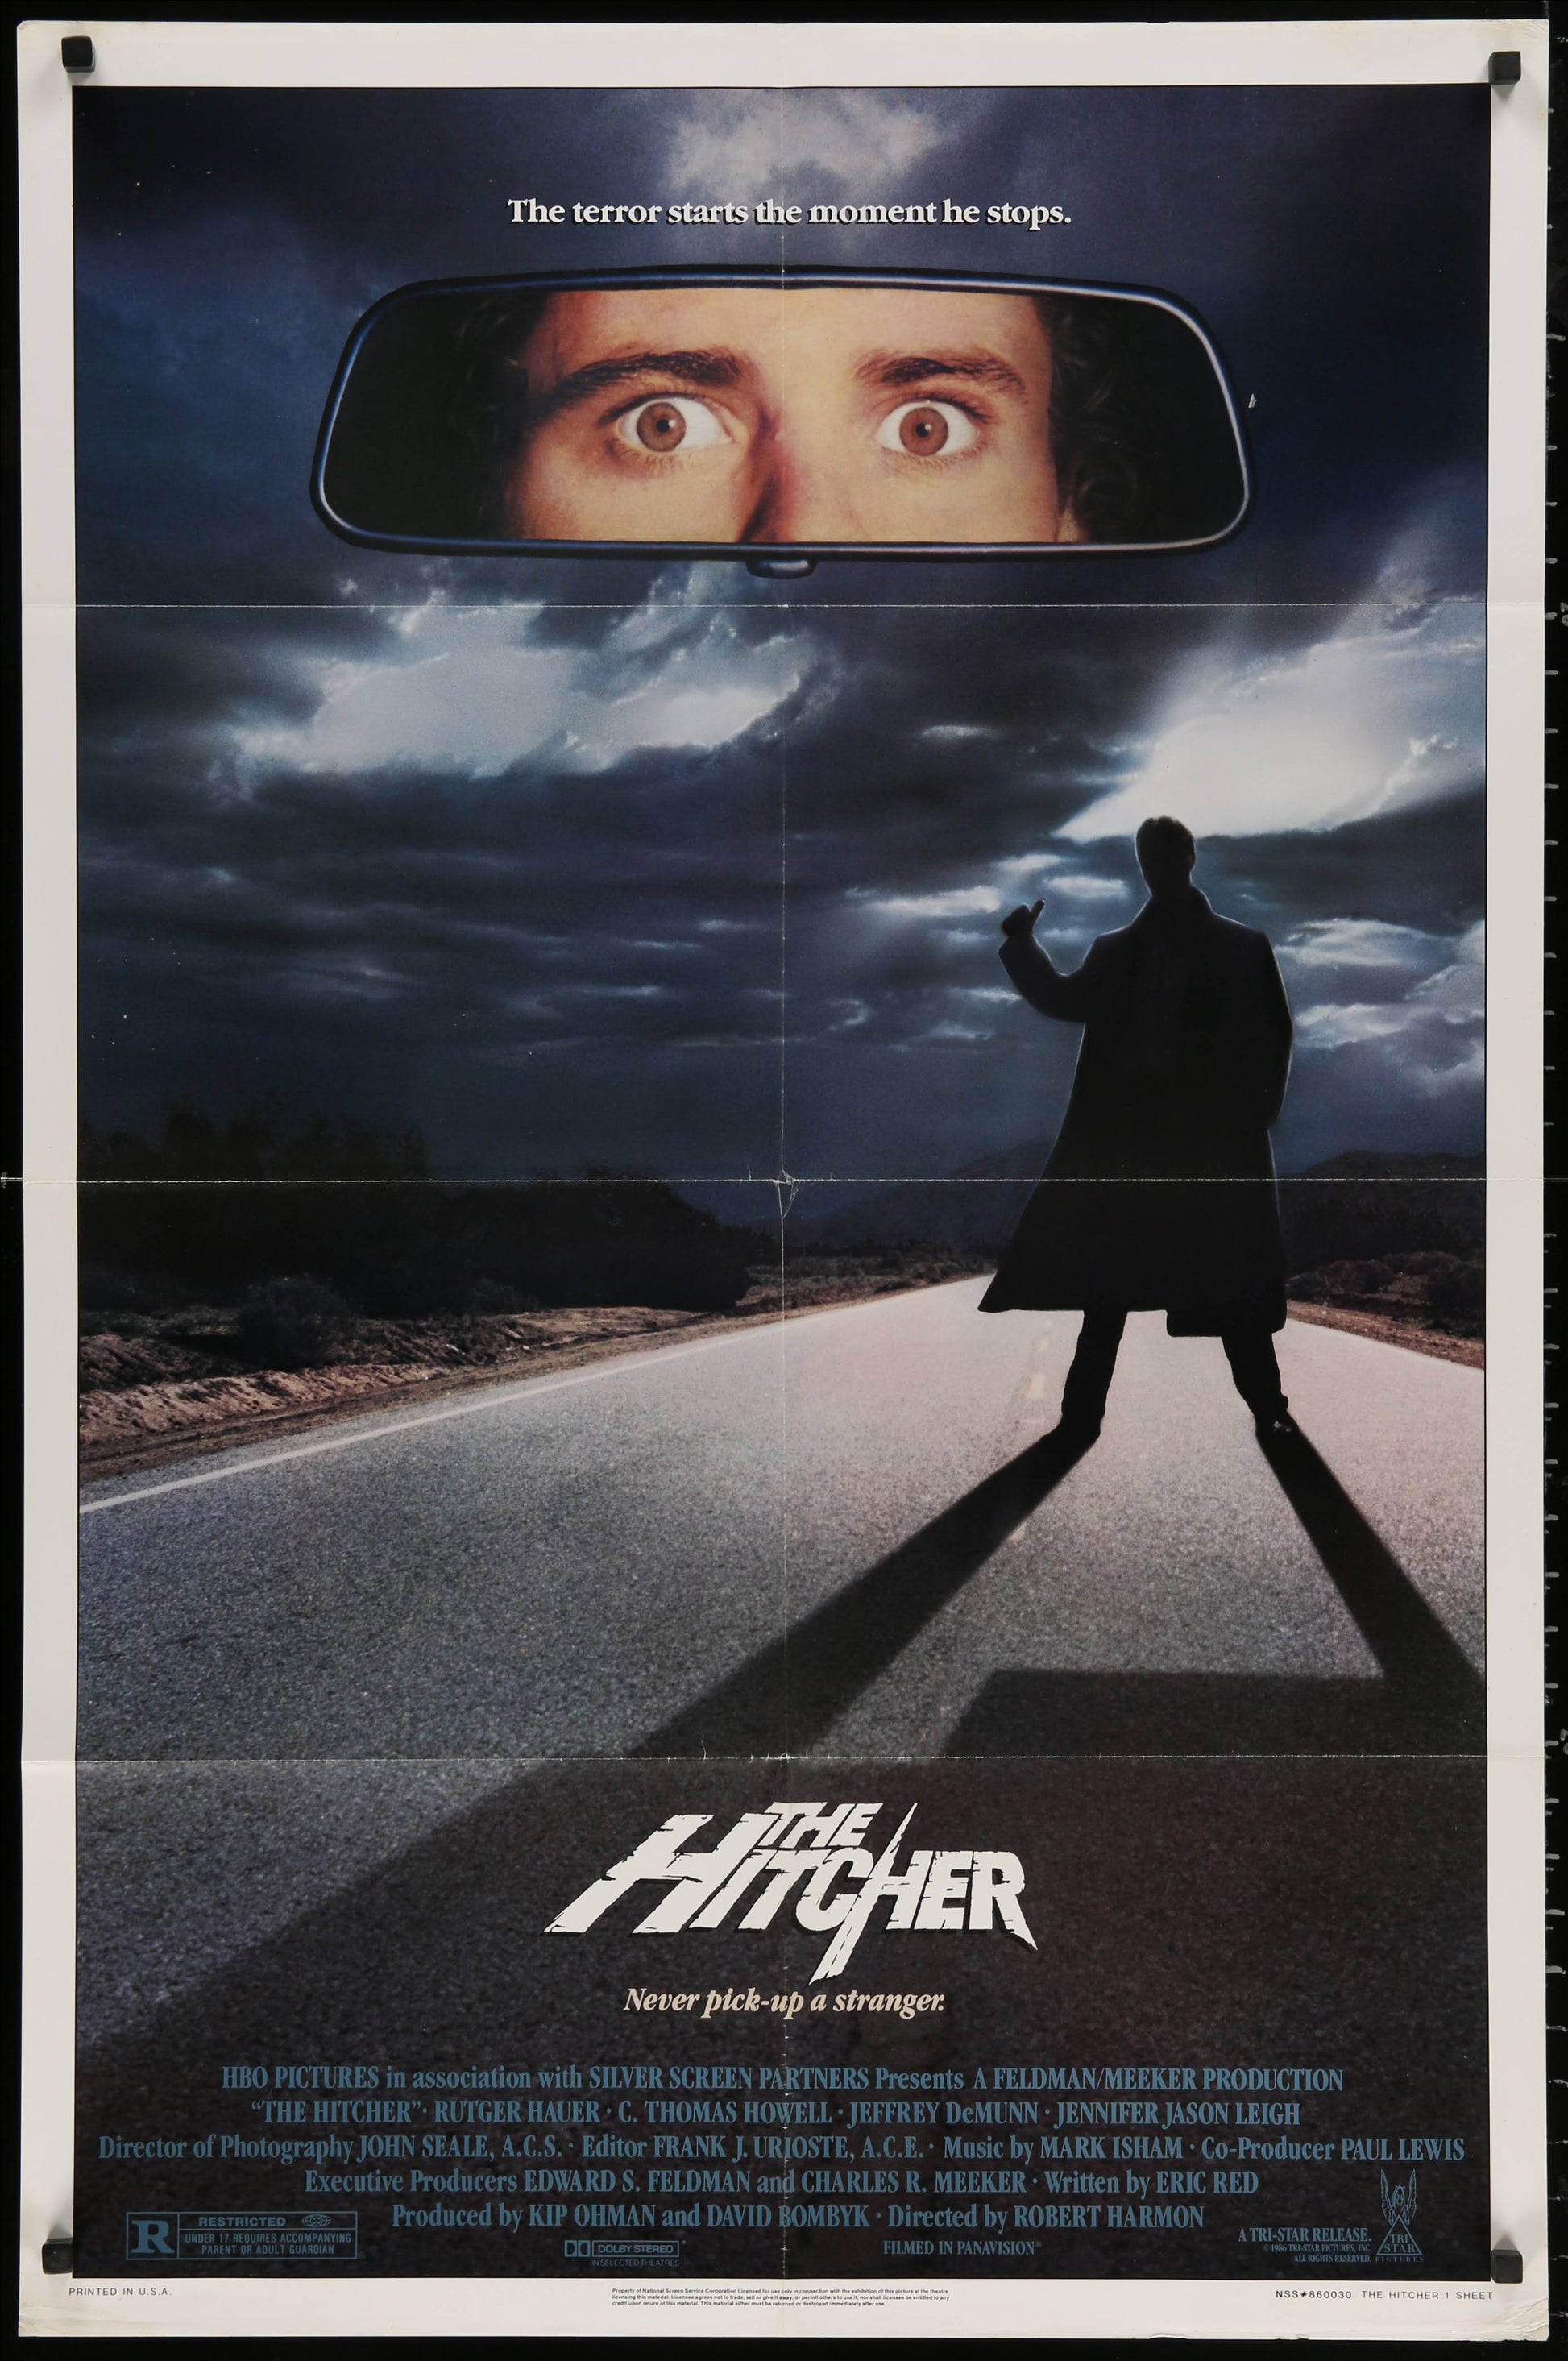 The Hitcher US One Sheet (1986) - ORIGINAL RELEASE - posterpalace.com